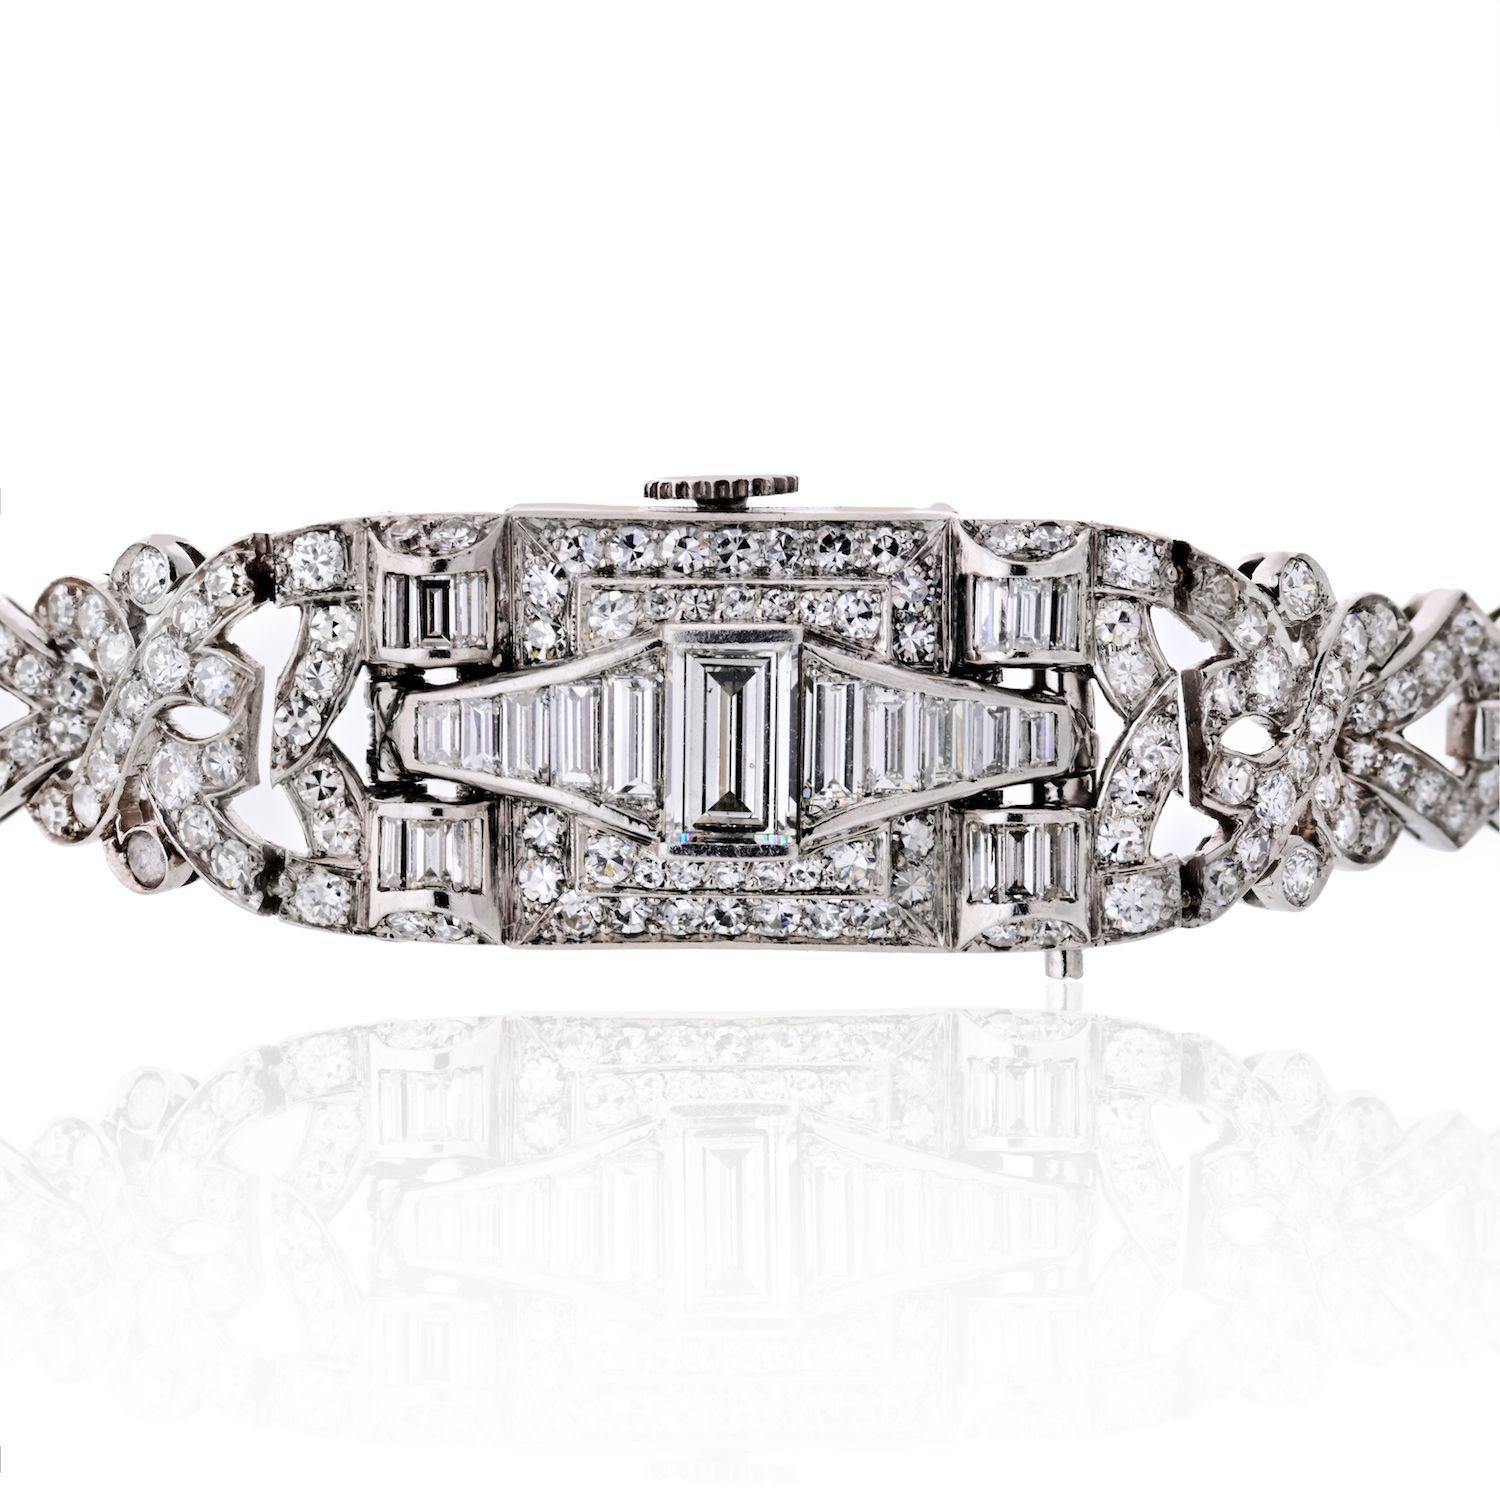 This is a gorgeous Art Deco Glycine Diamond Platinum Watch. The watch is set with approximately 6.50ct of round and baguette cut diamonds. The color of the diamonds is H-I and the clarity is VS on average. The dial is signed. The length of the watch